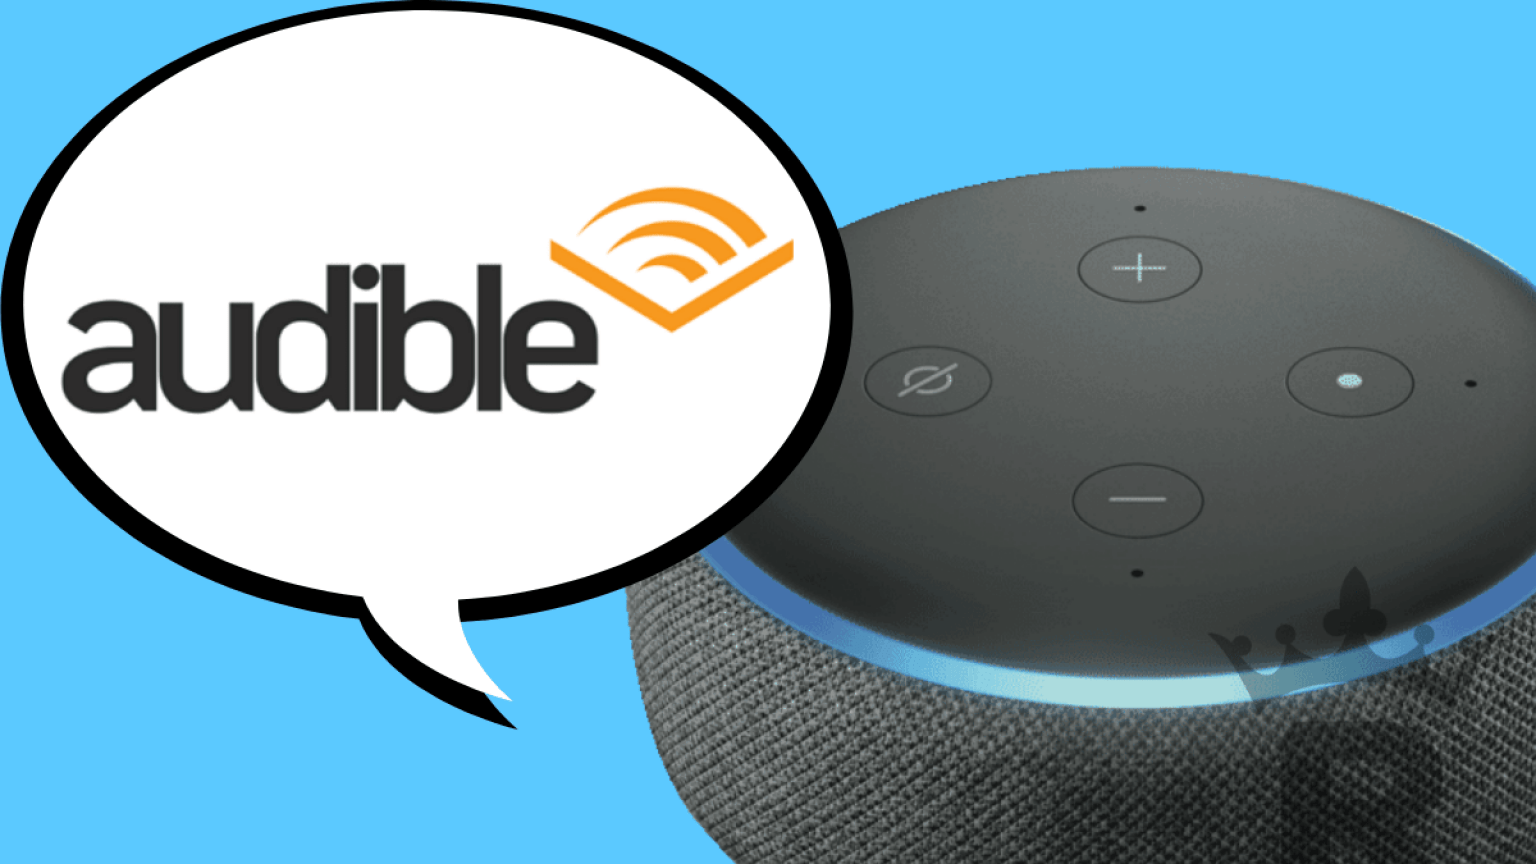 How to listen to Audible audiobooks with Alexa